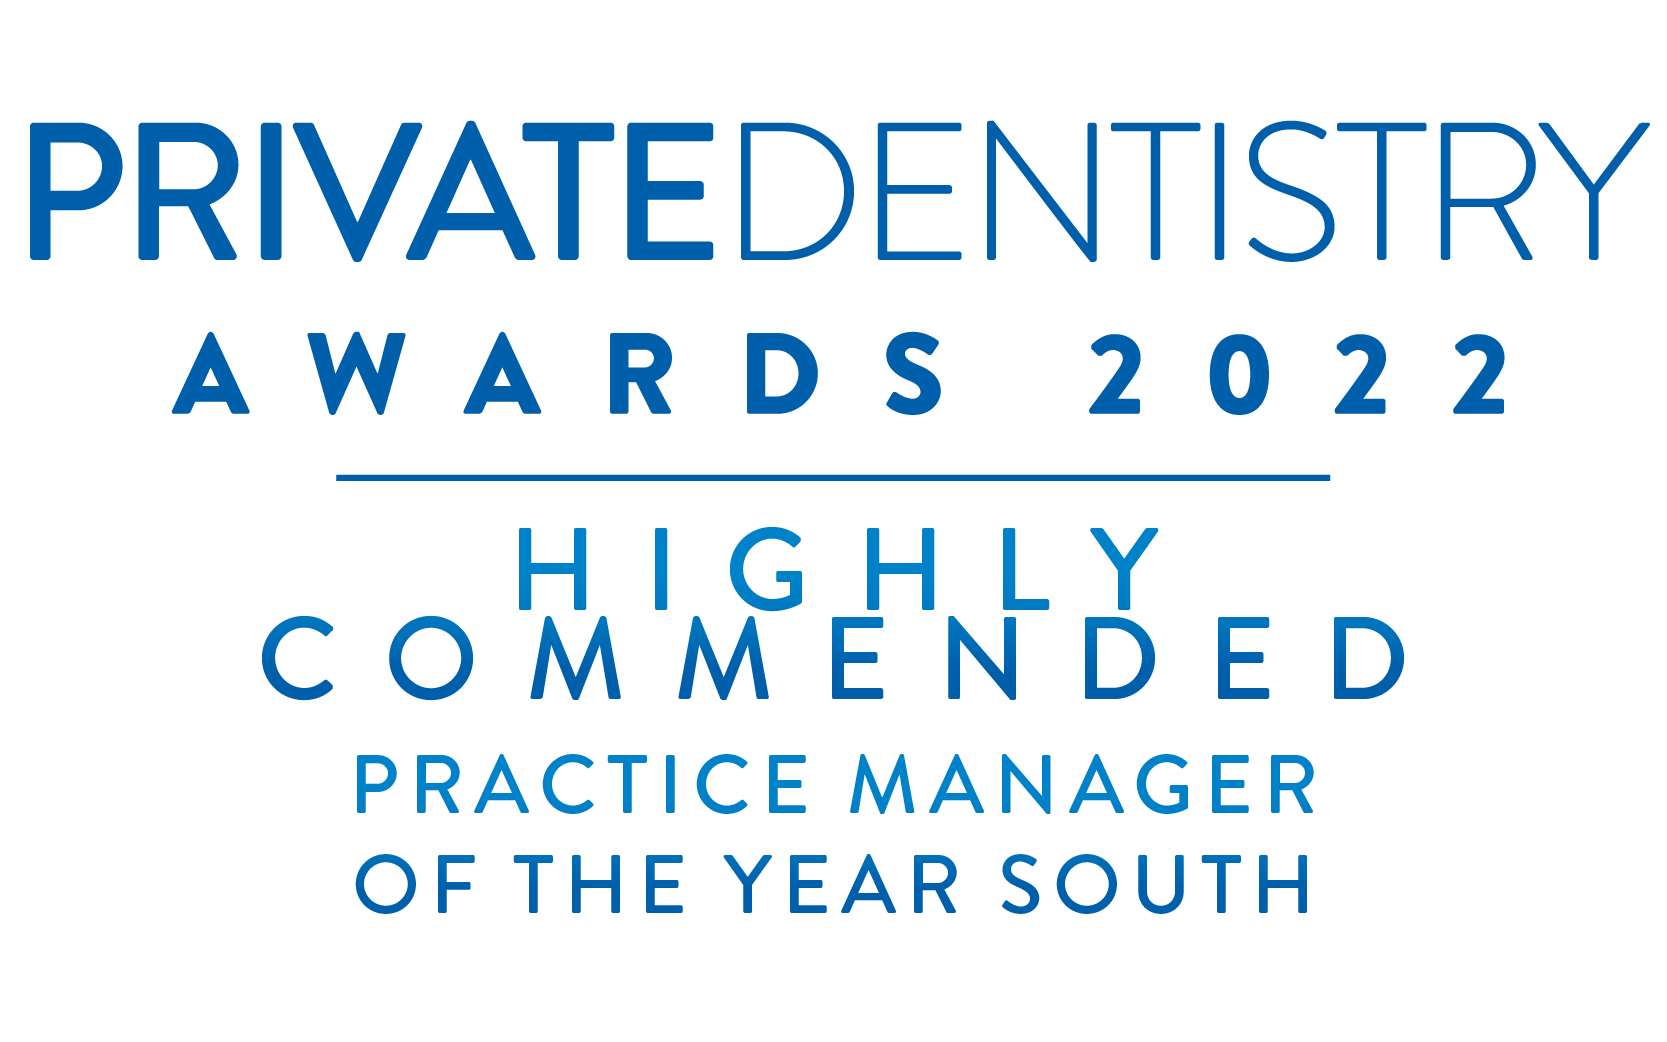 Private Dentistry Manager Awards 2022